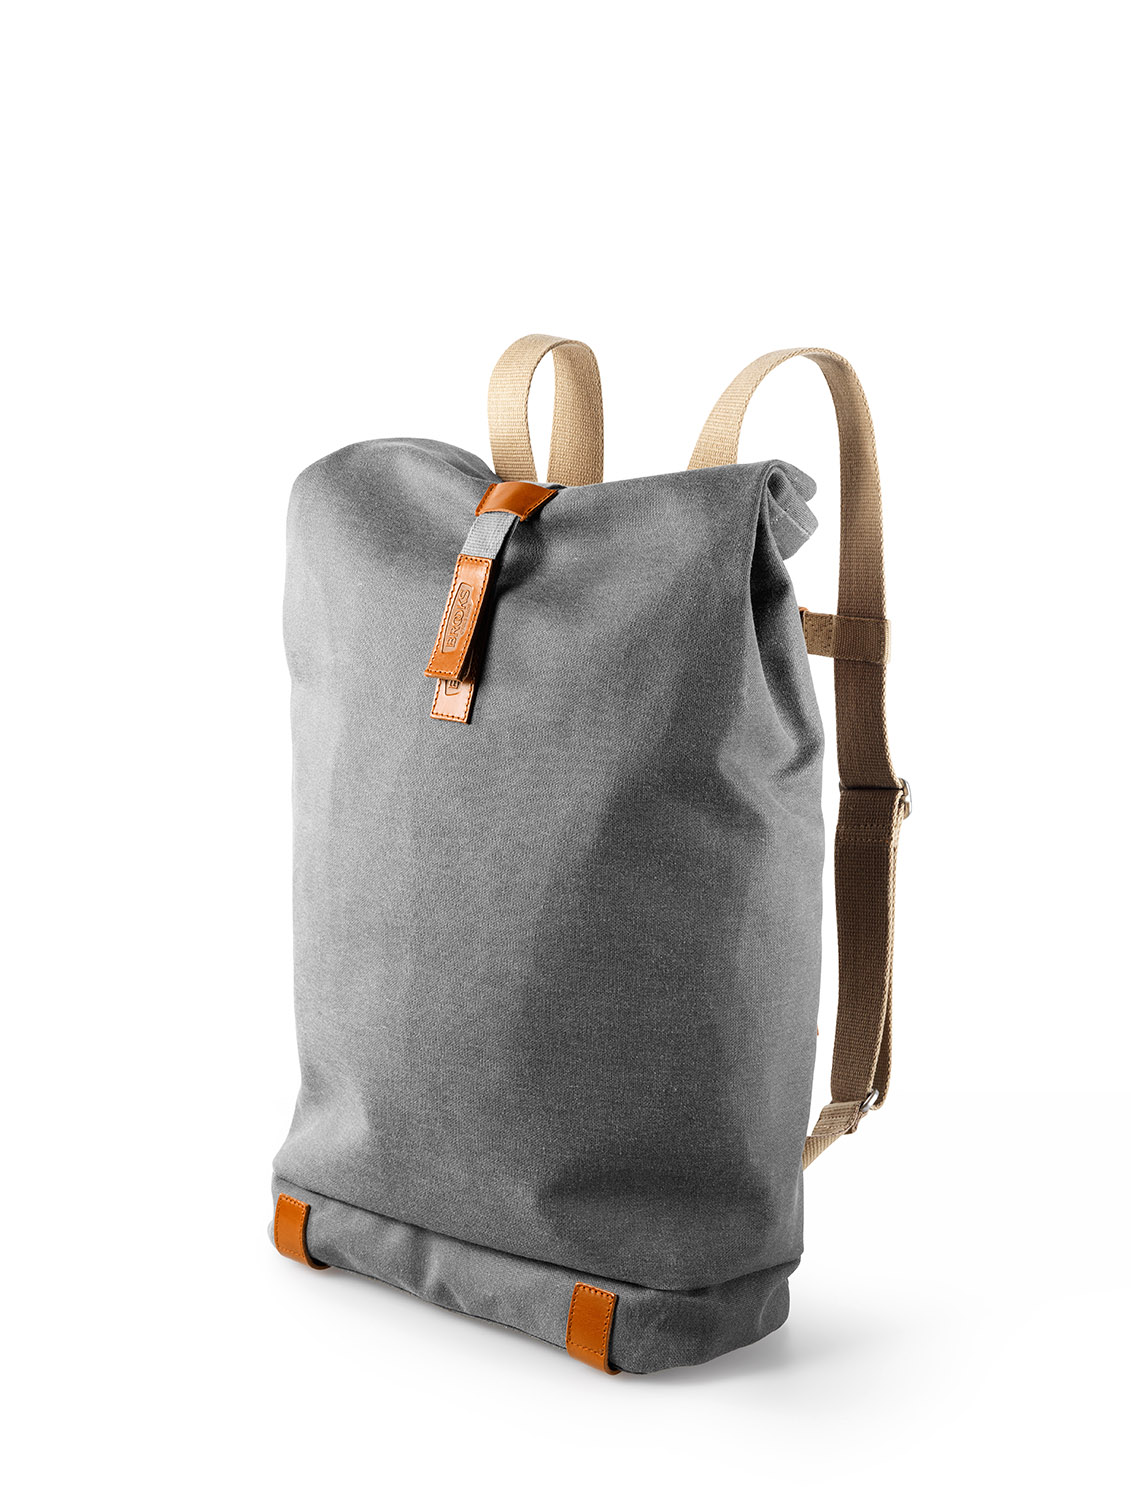 Pickwick backpack   grey   front